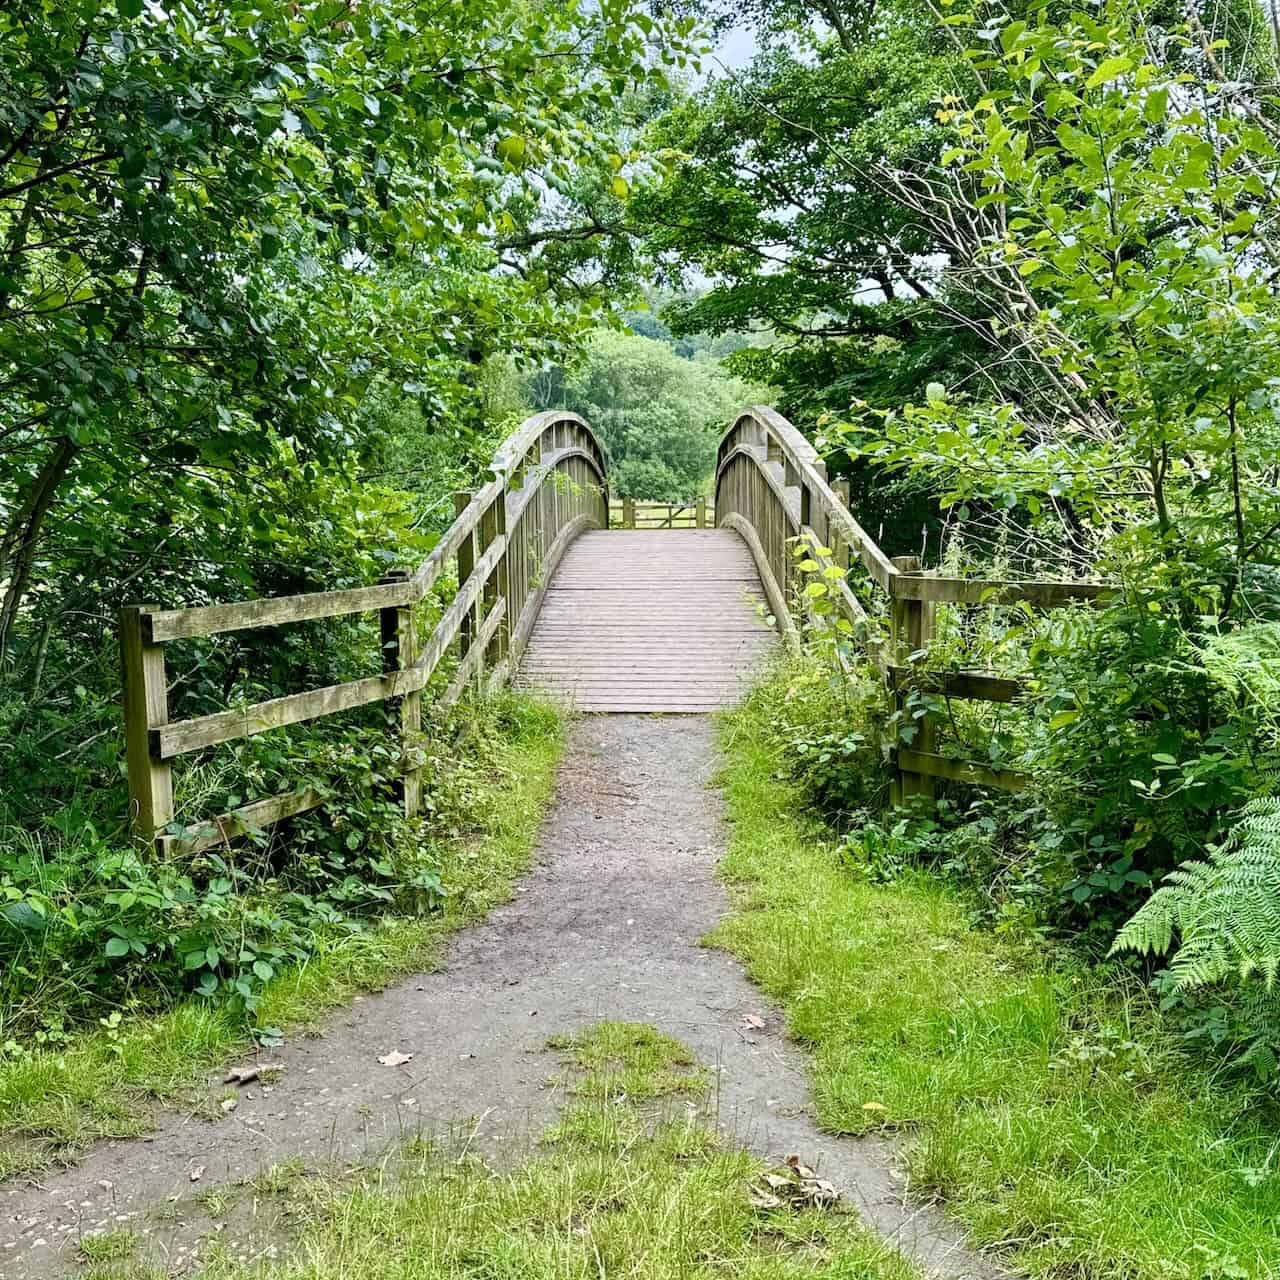 Charming wooden bridge crossing the Murk Esk. The bridge is on the right-hand side and not part of the Goathland to Grosmont walk.